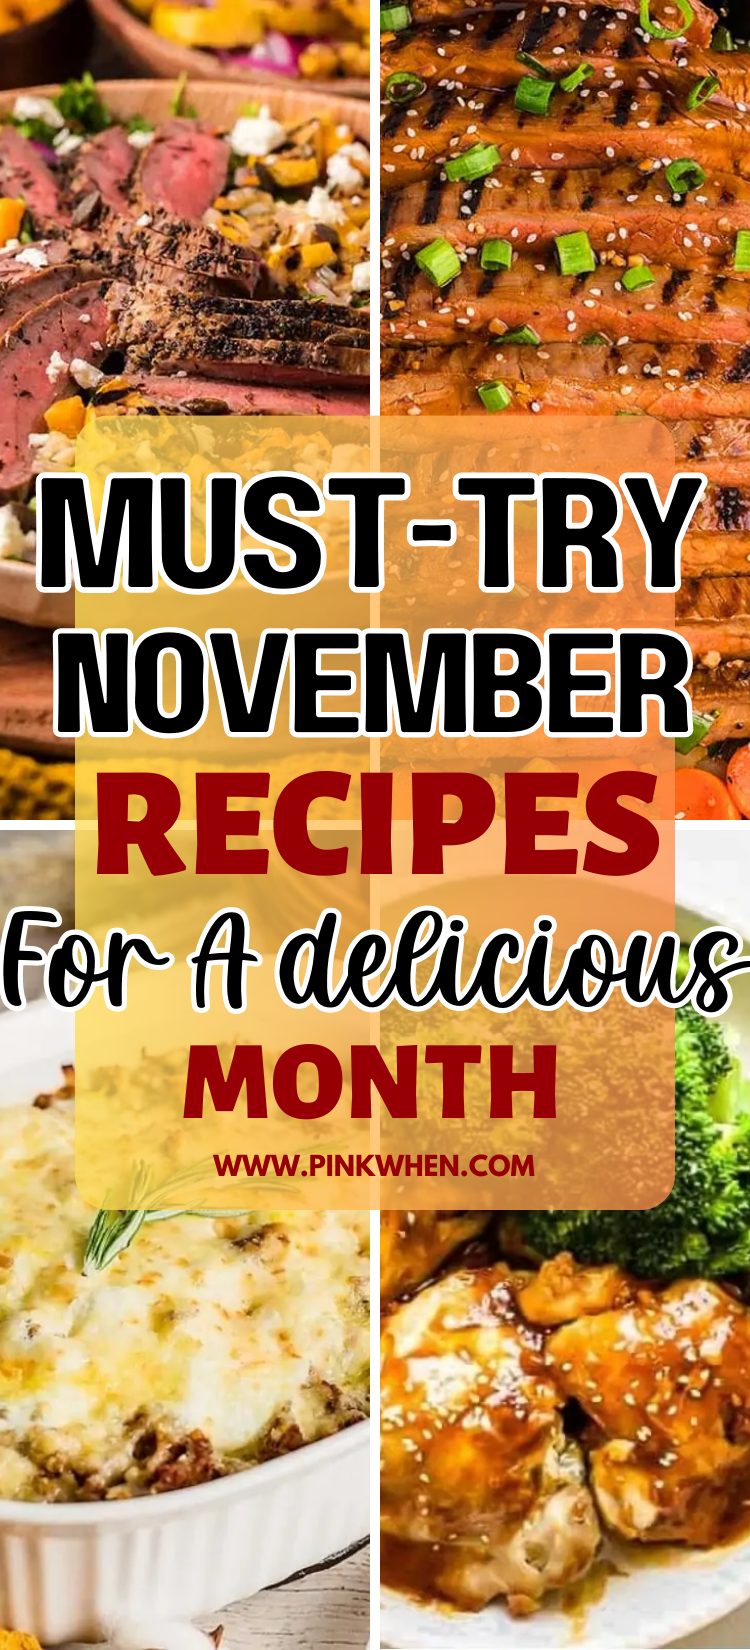 Must-Try November Recipes for a Delicious Month